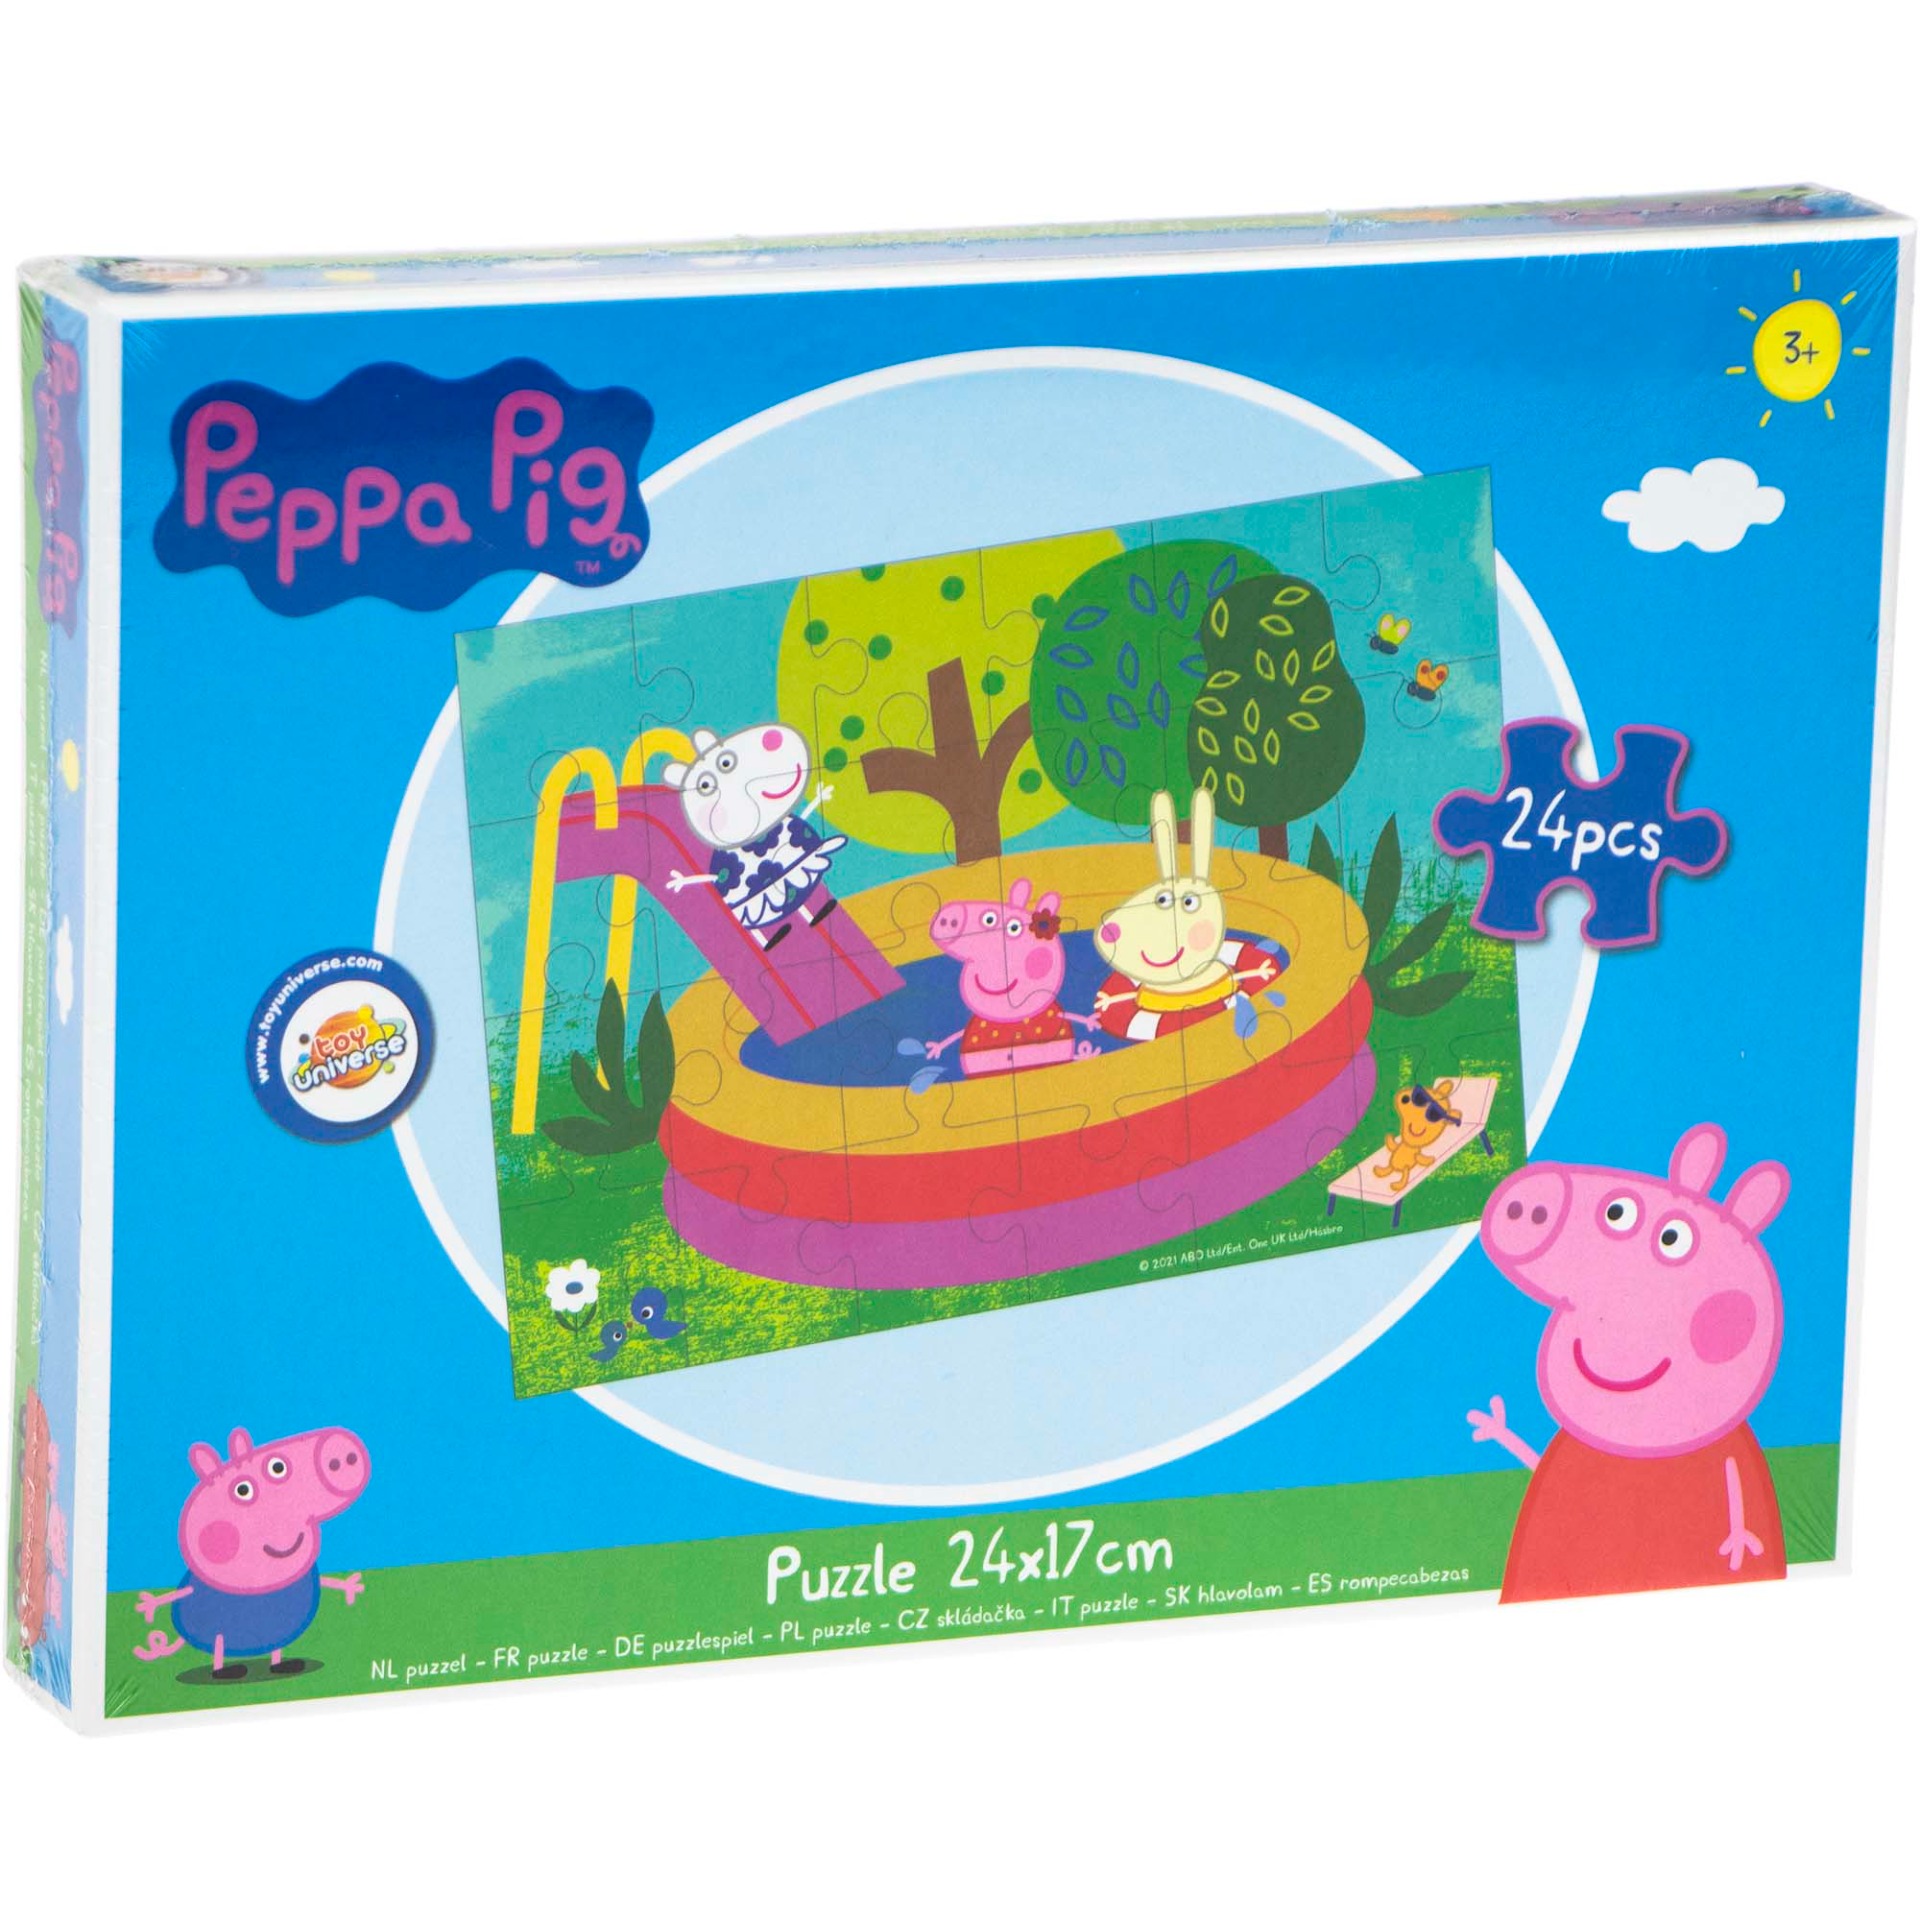 8720029024994-7puzzle-with-peppa-pig-character-wholesale